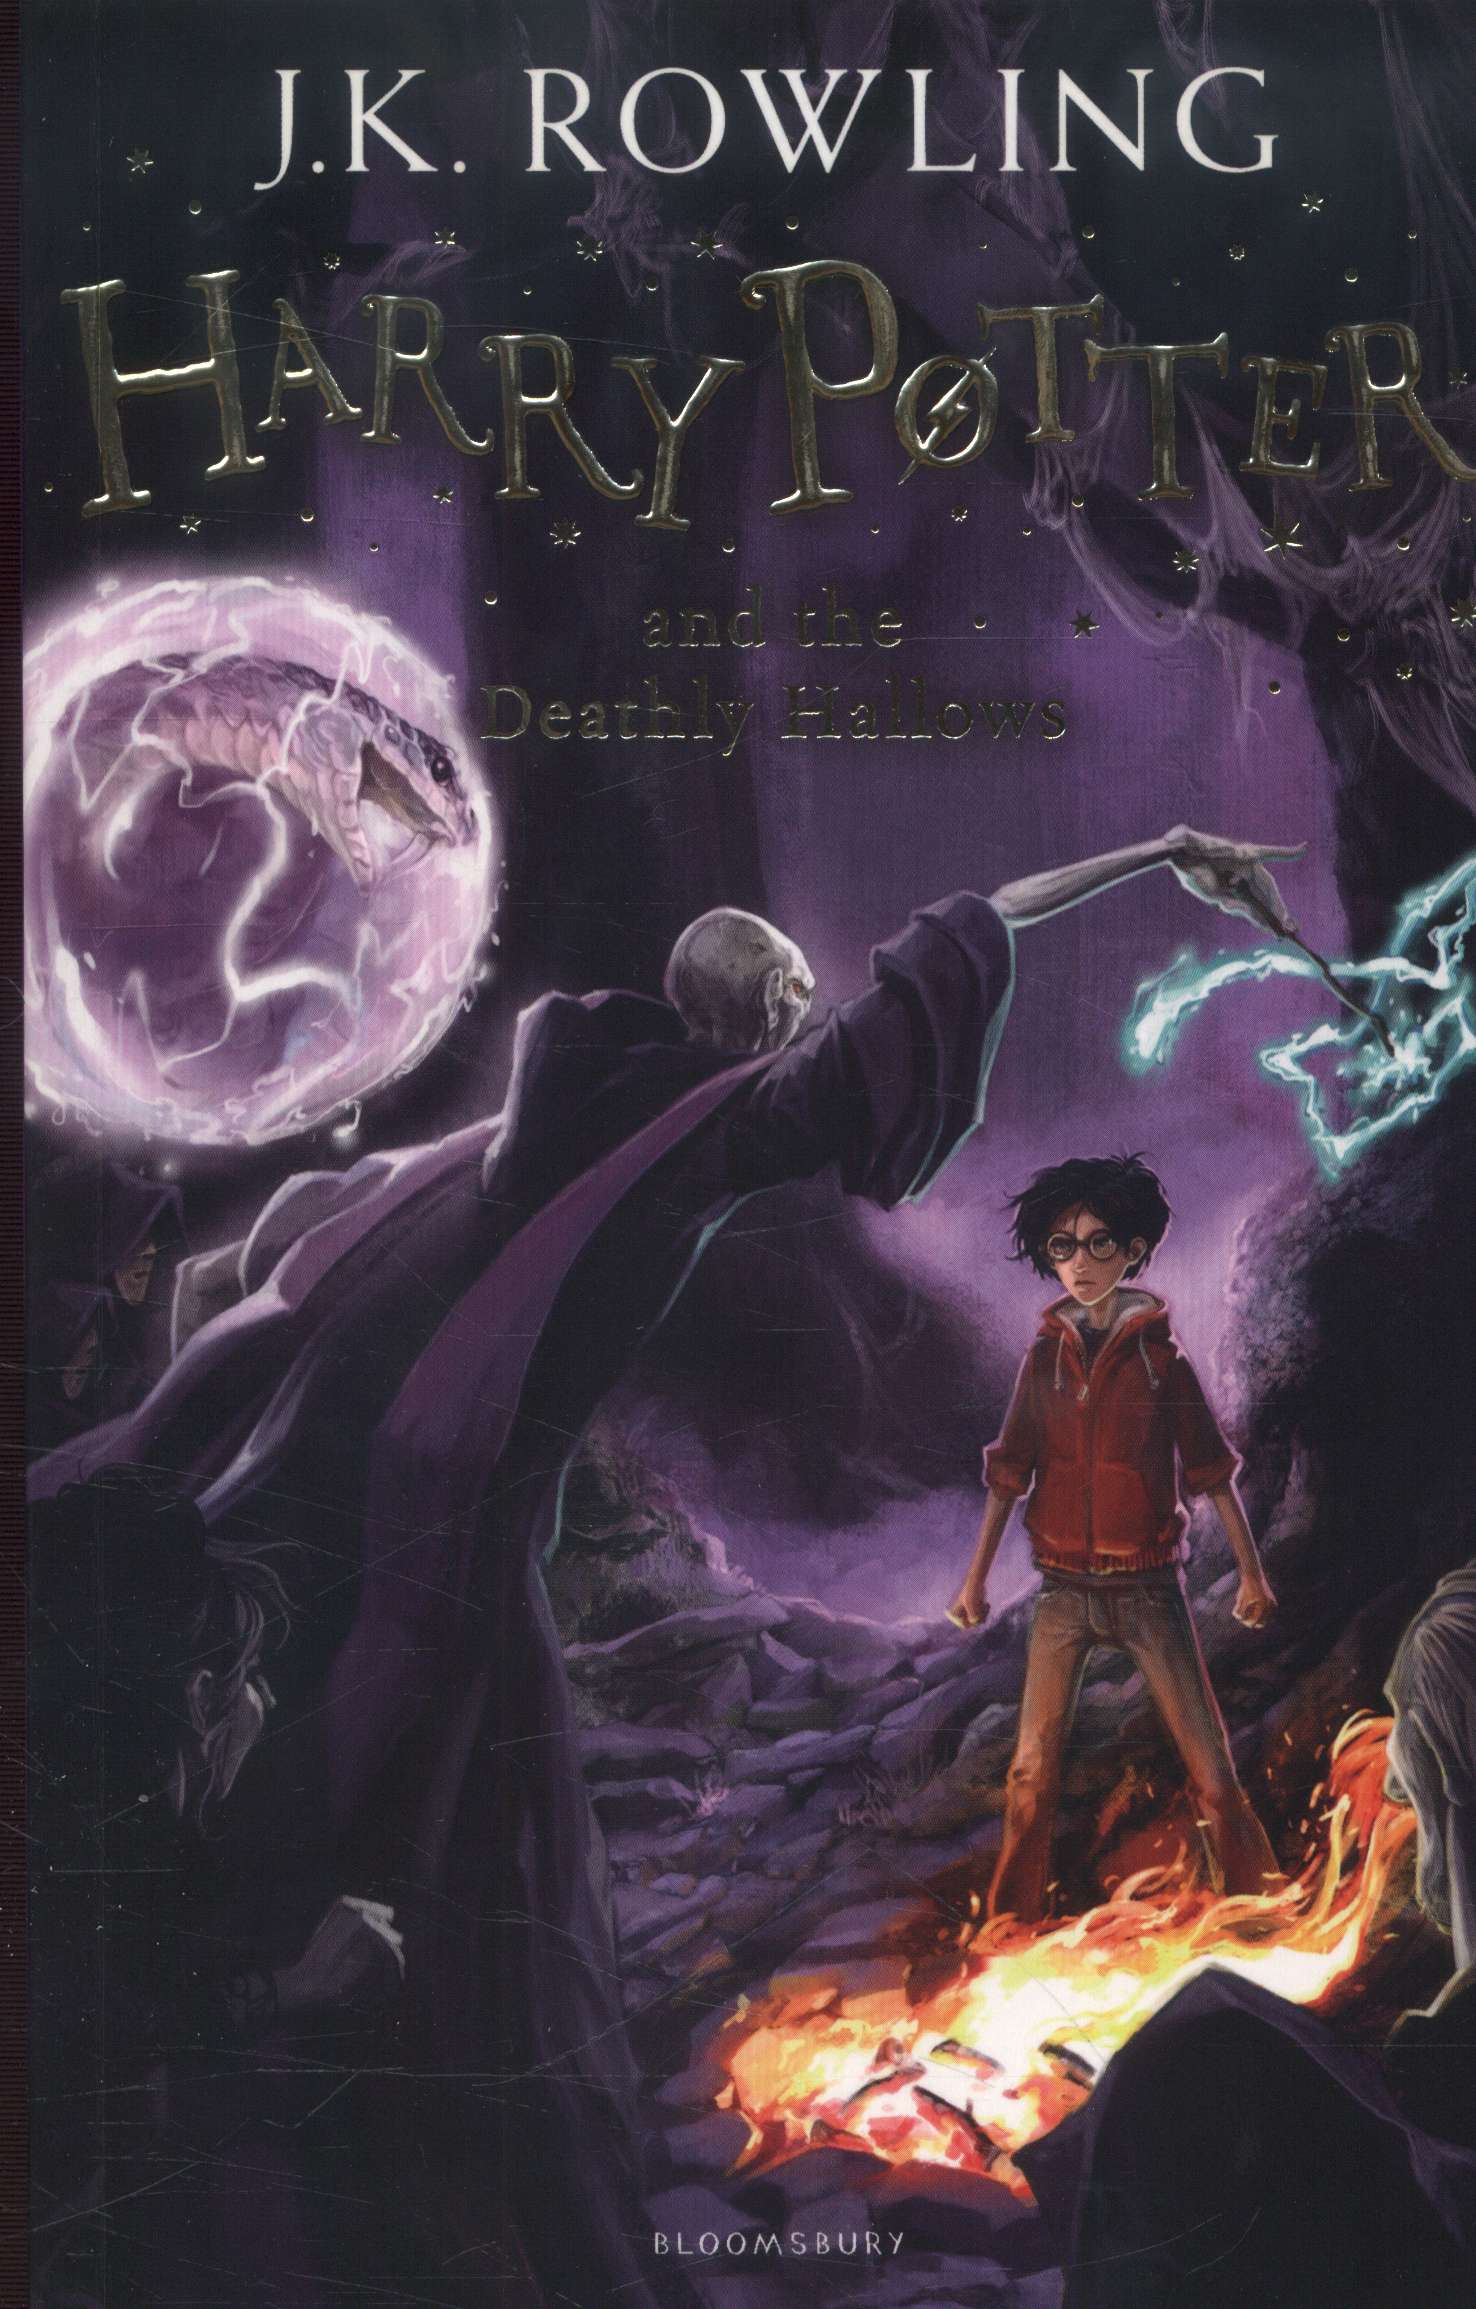 Harry Potter and the Deathly Hallows by Rowling, J. K. (9781408855713 ...